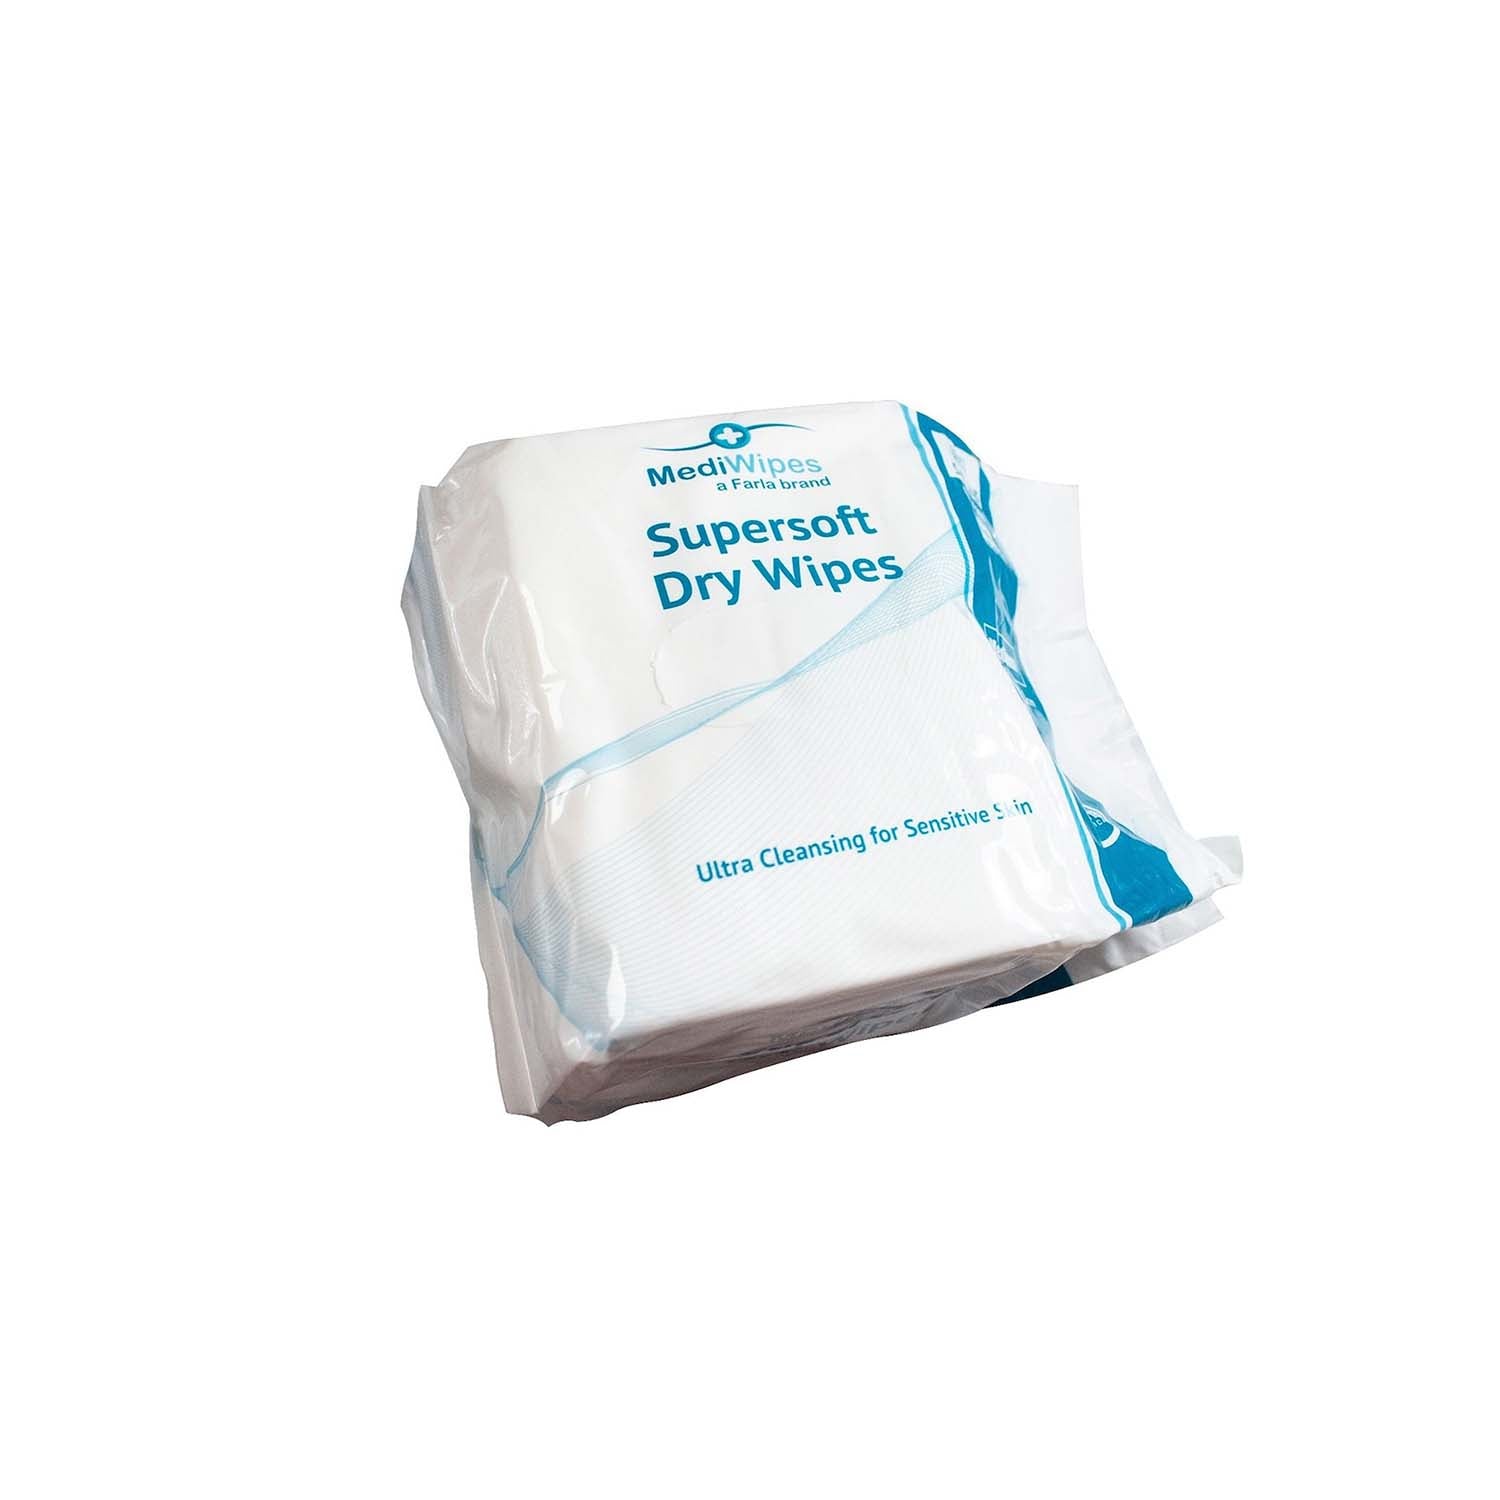 MediWipes Supersoft Dry Wipes | Medium | Pack of 80 (1)